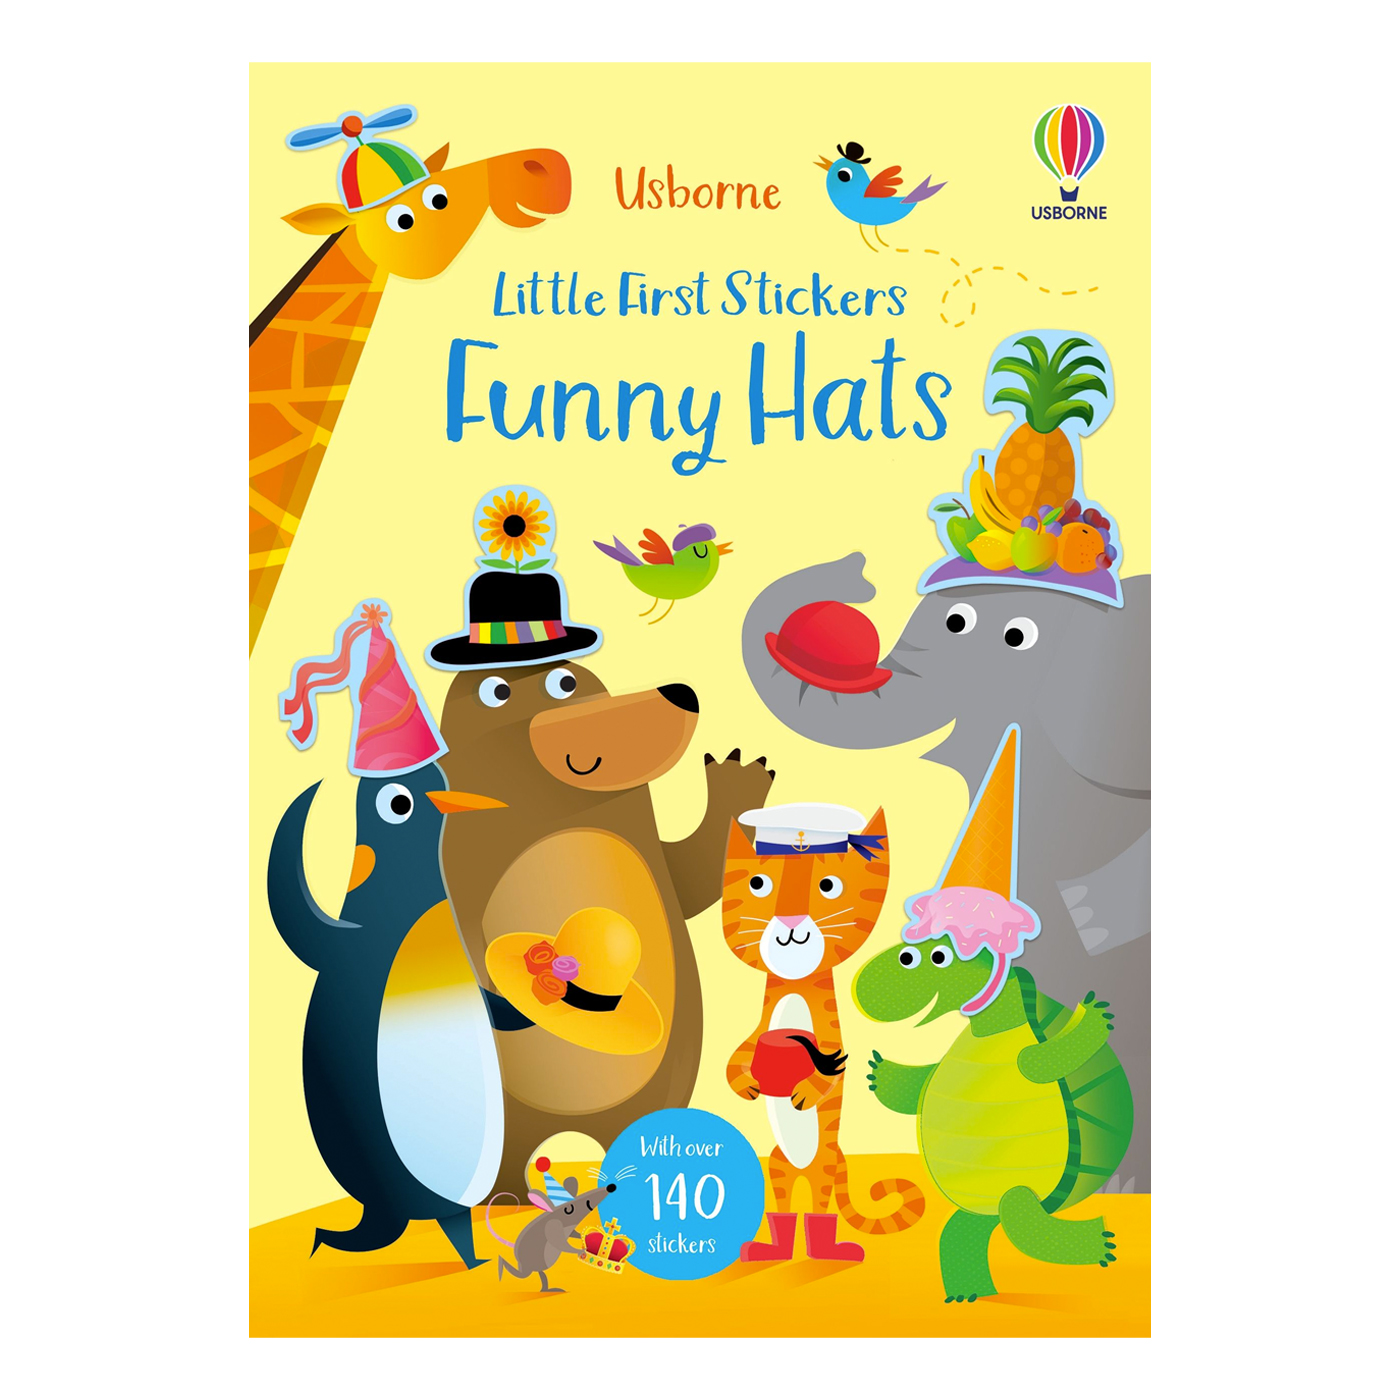  Little First Stickers Funny Hats